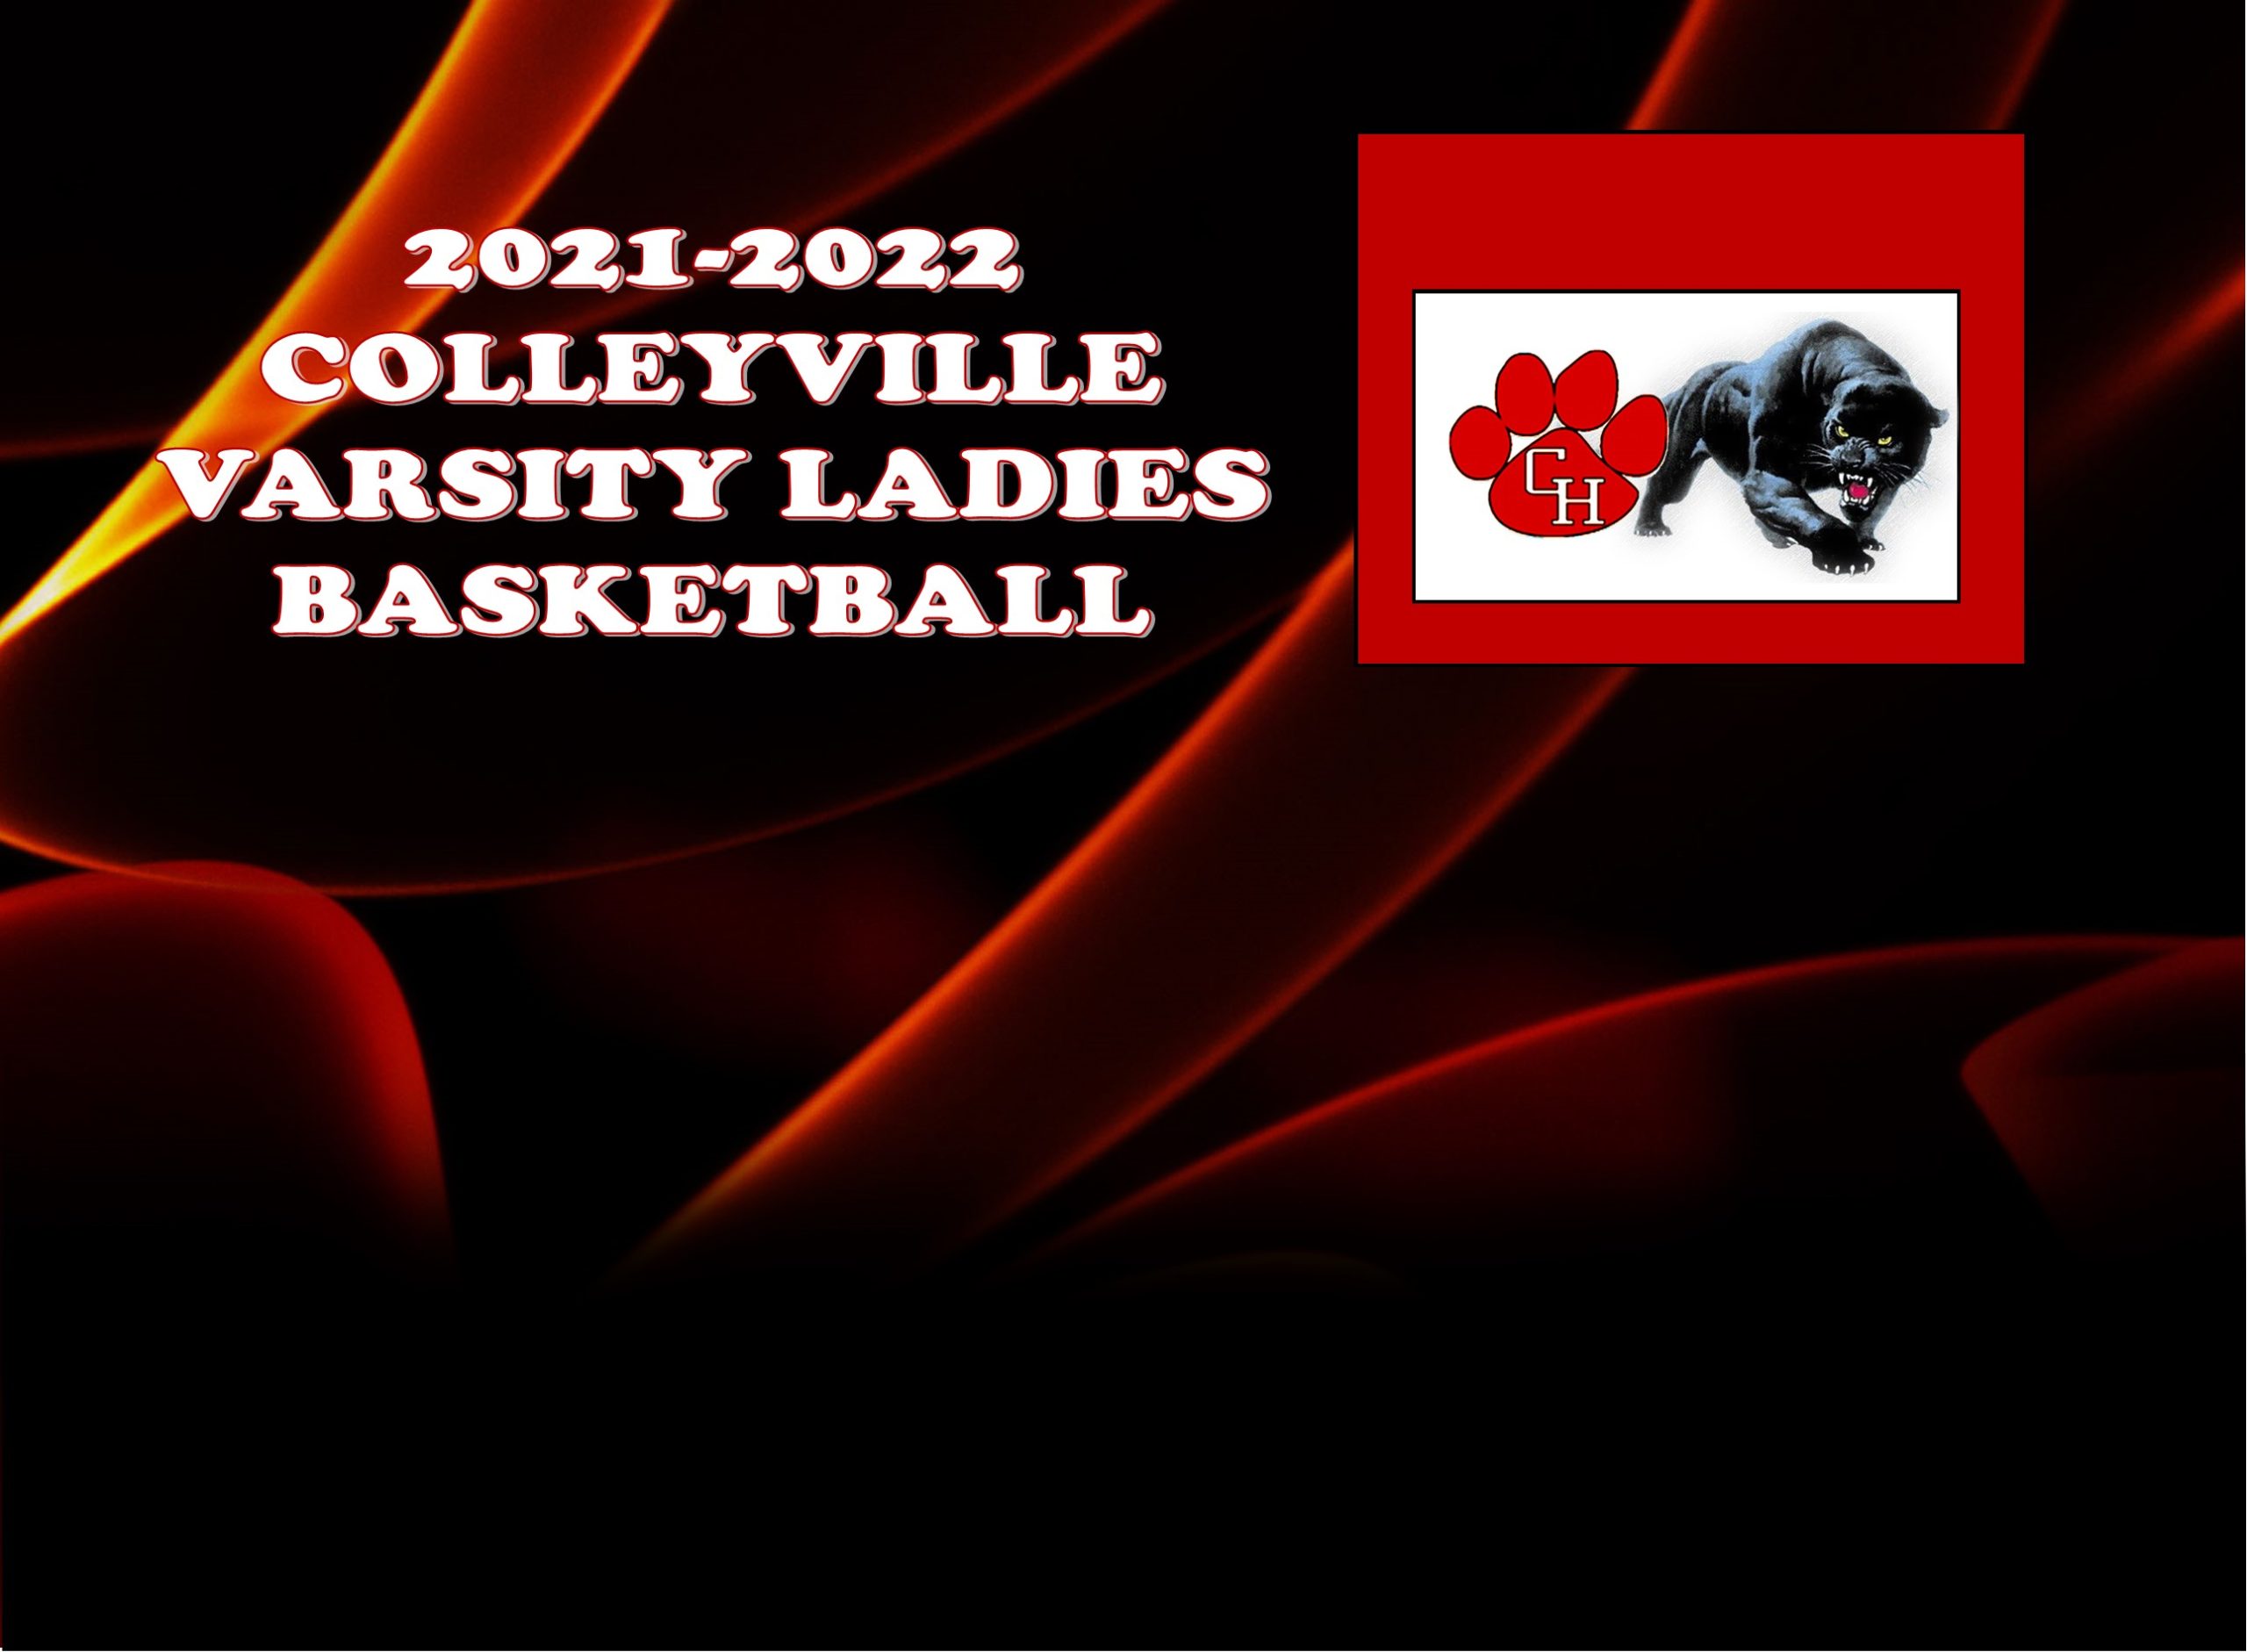 GCISD Basketball: Colleyville Lady Panthers Toppled by Timber View Falcons 34-32